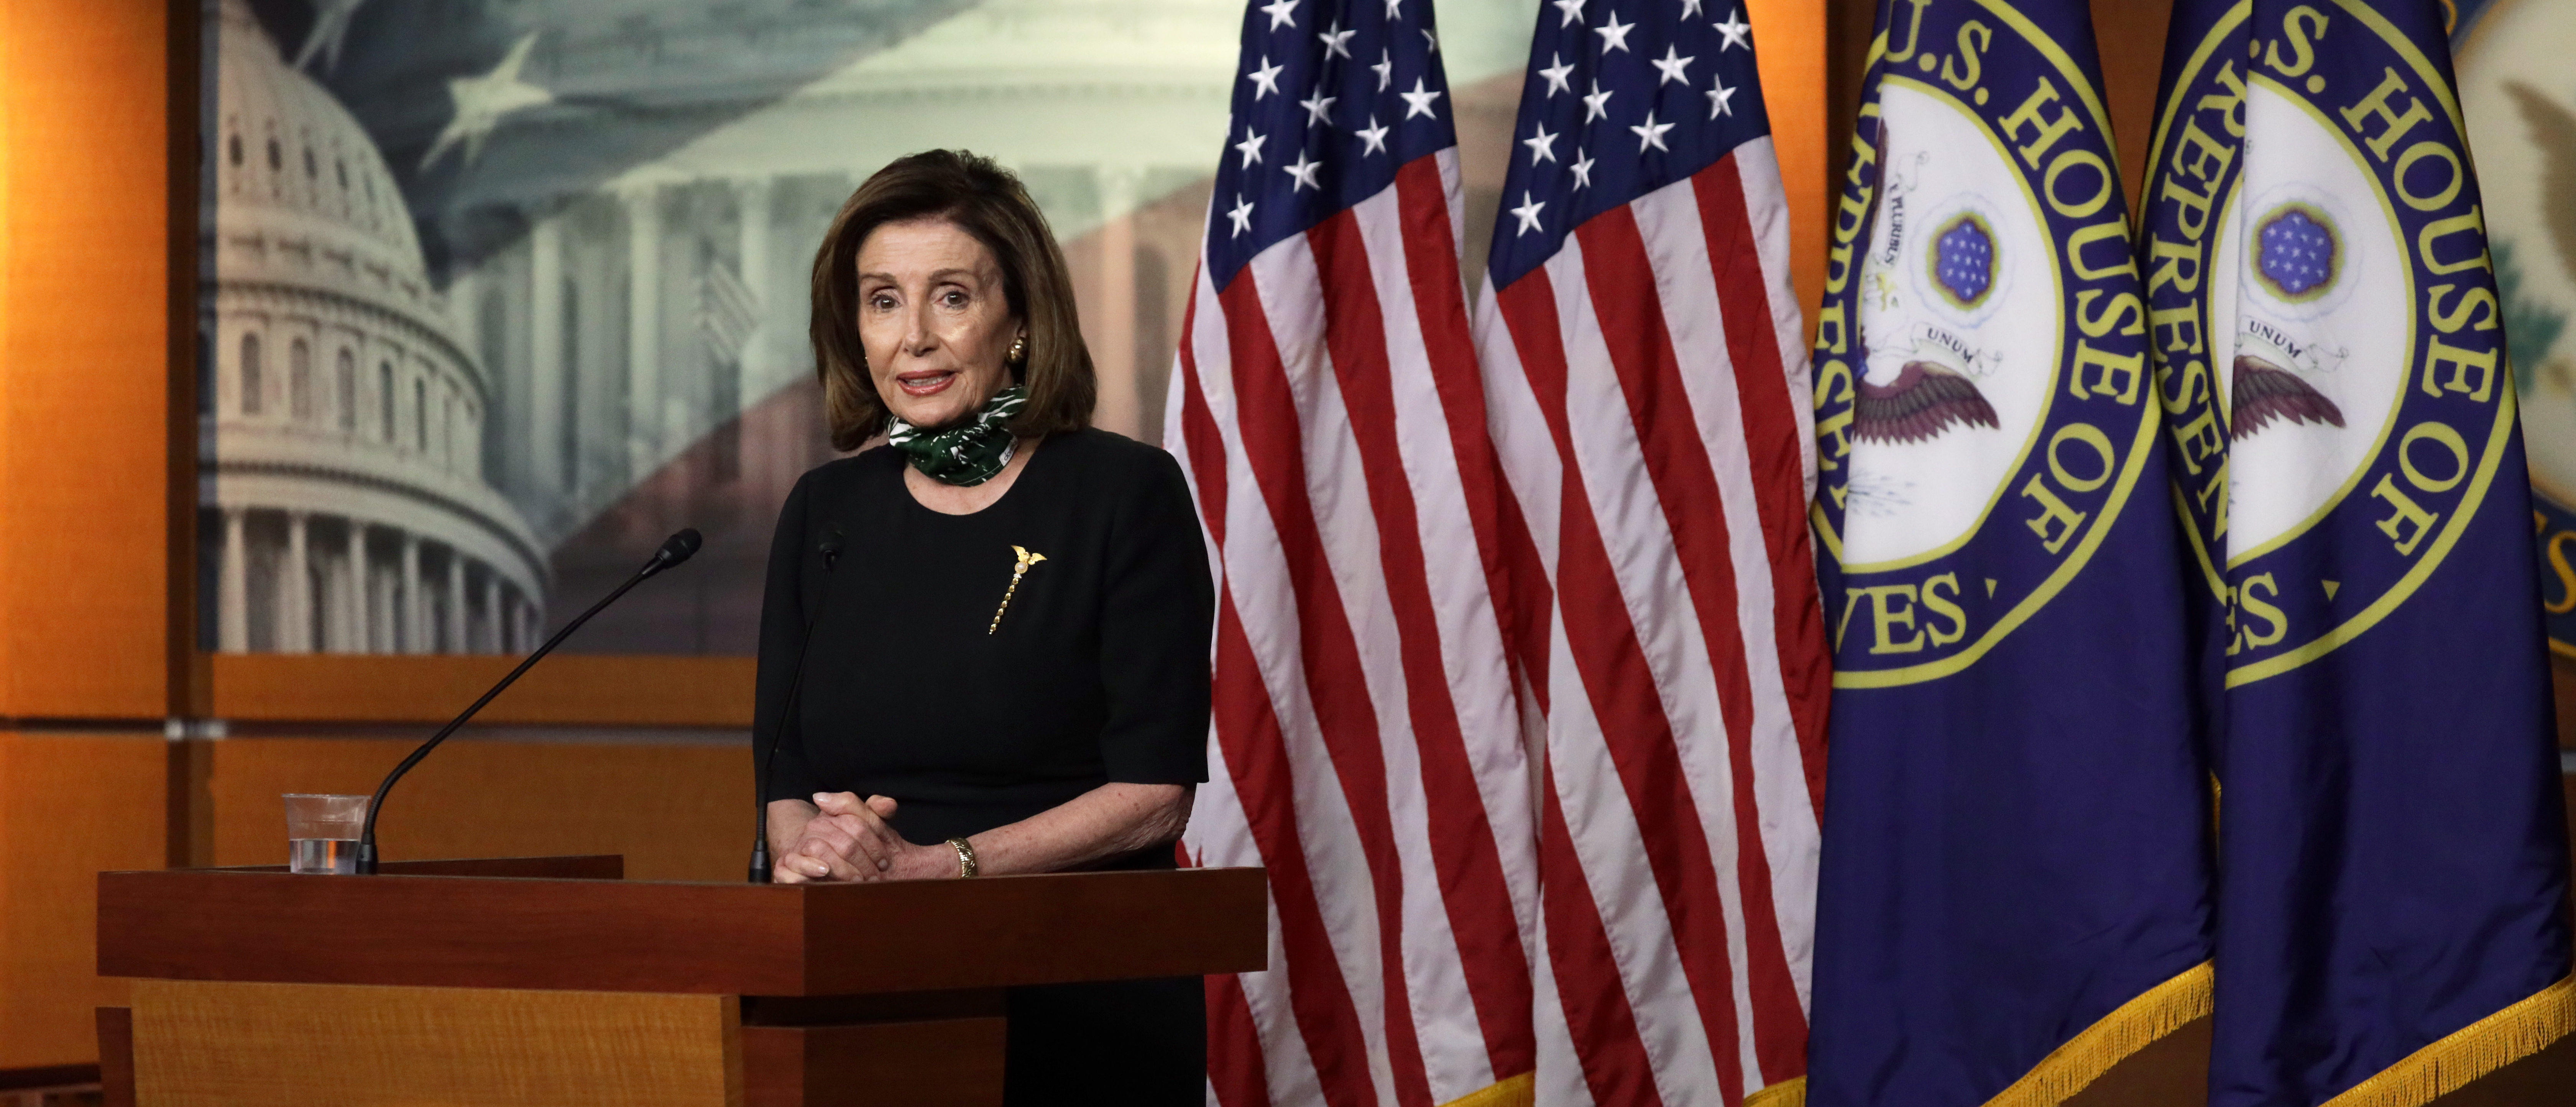 WASHINGTON, DC - MAY 14: U.S. Speaker of the House Rep. Nancy Pelosi (D-CA) speaks during a weekly news conference at the U.S. Capitol May 14, 2020 in Washington, DC. Speaker Pelosi held a weekly news conference to fill questions from members of the press. (Photo by Alex Wong/Getty Images)